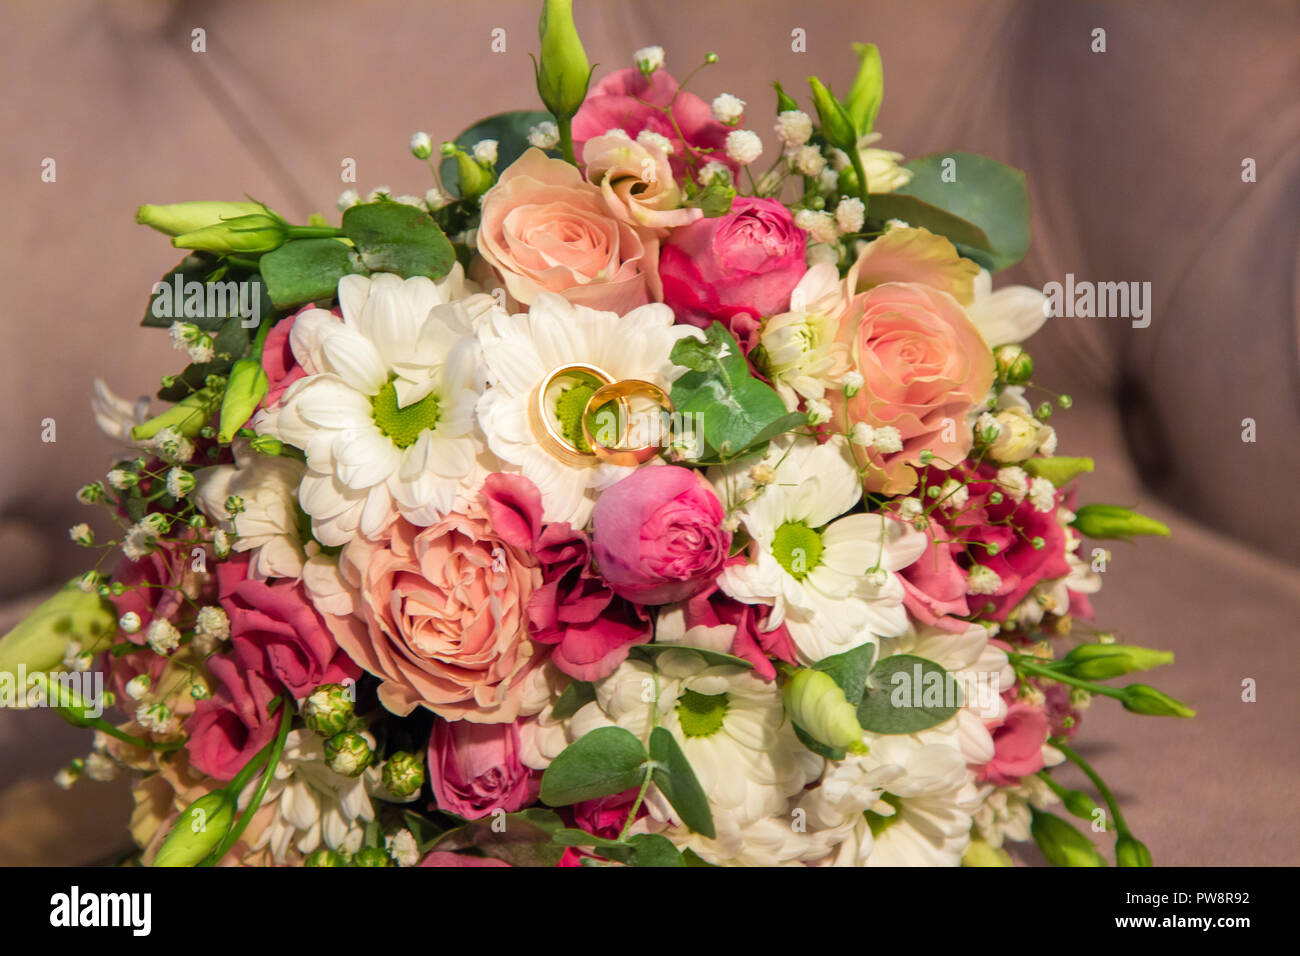 Wedding Rings with beautiful natural flowers bouquet Stock Photo - Alamy